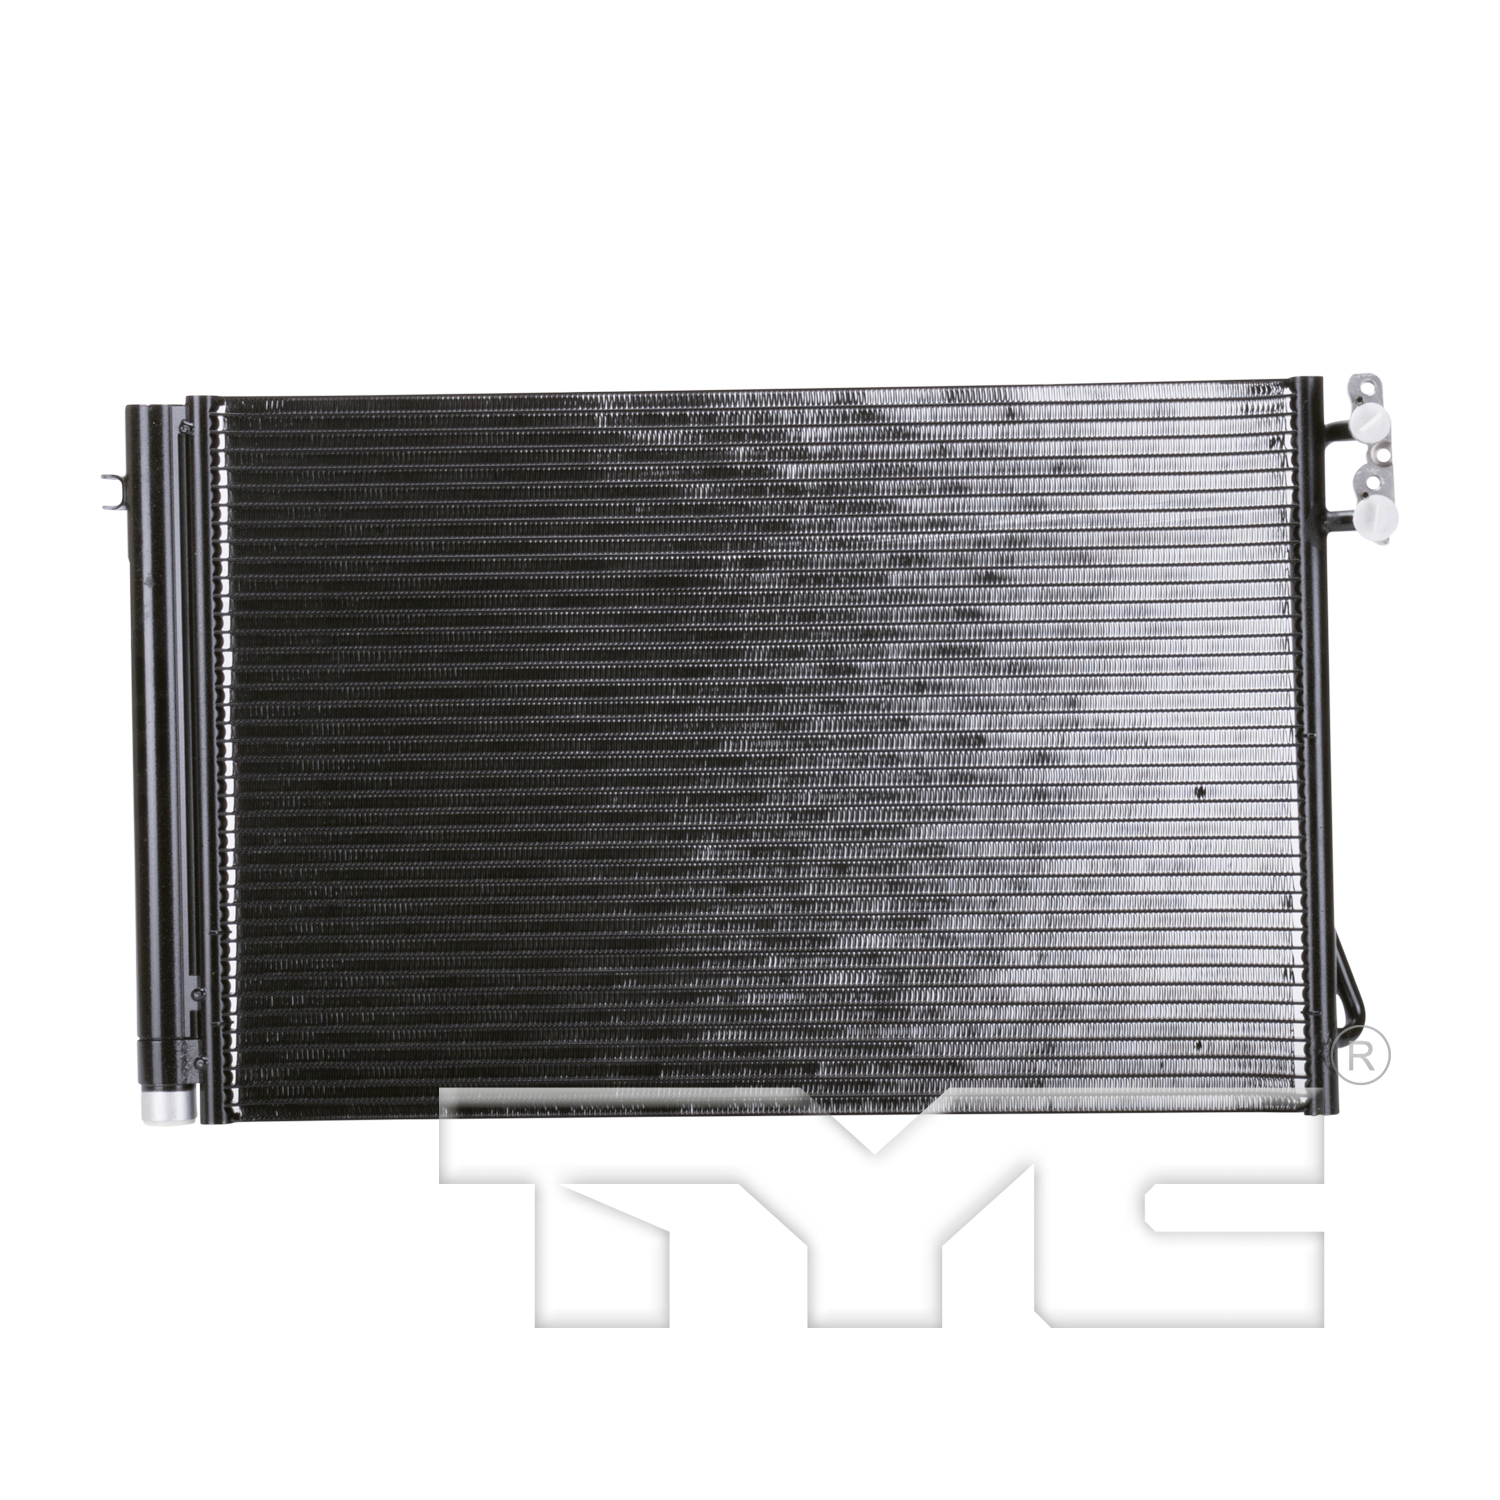 Aftermarket AC CONDENSERS for BMW - 330I, 330i,06-06,Air conditioning condenser